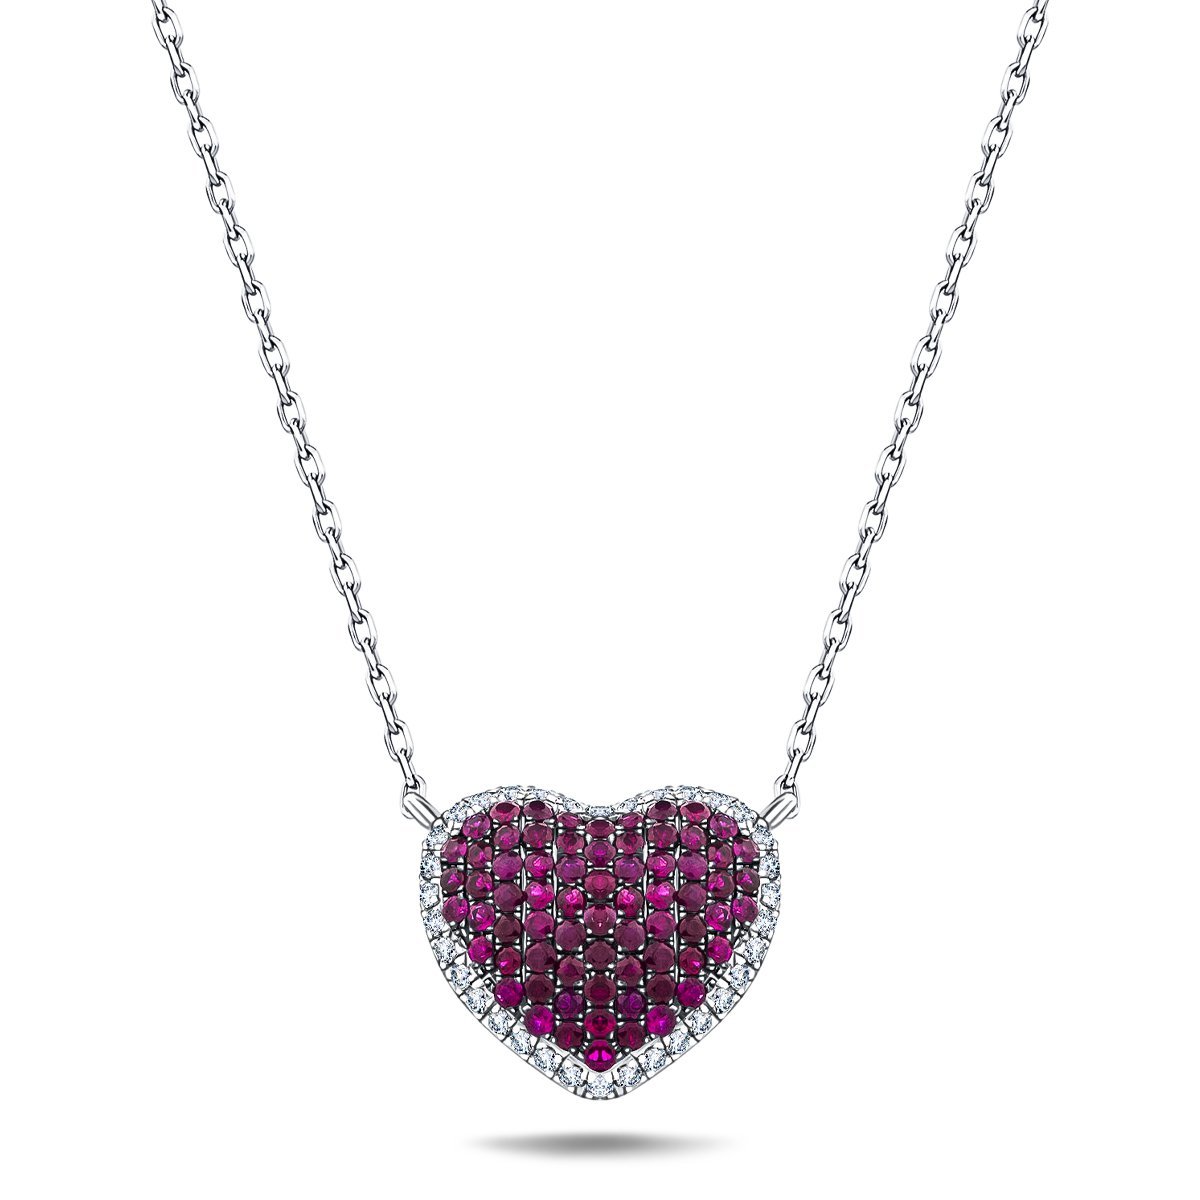 0.90ct Ruby & 0.25ct Diamond Heart Shaped Necklace in 18k White Gold - All Diamond